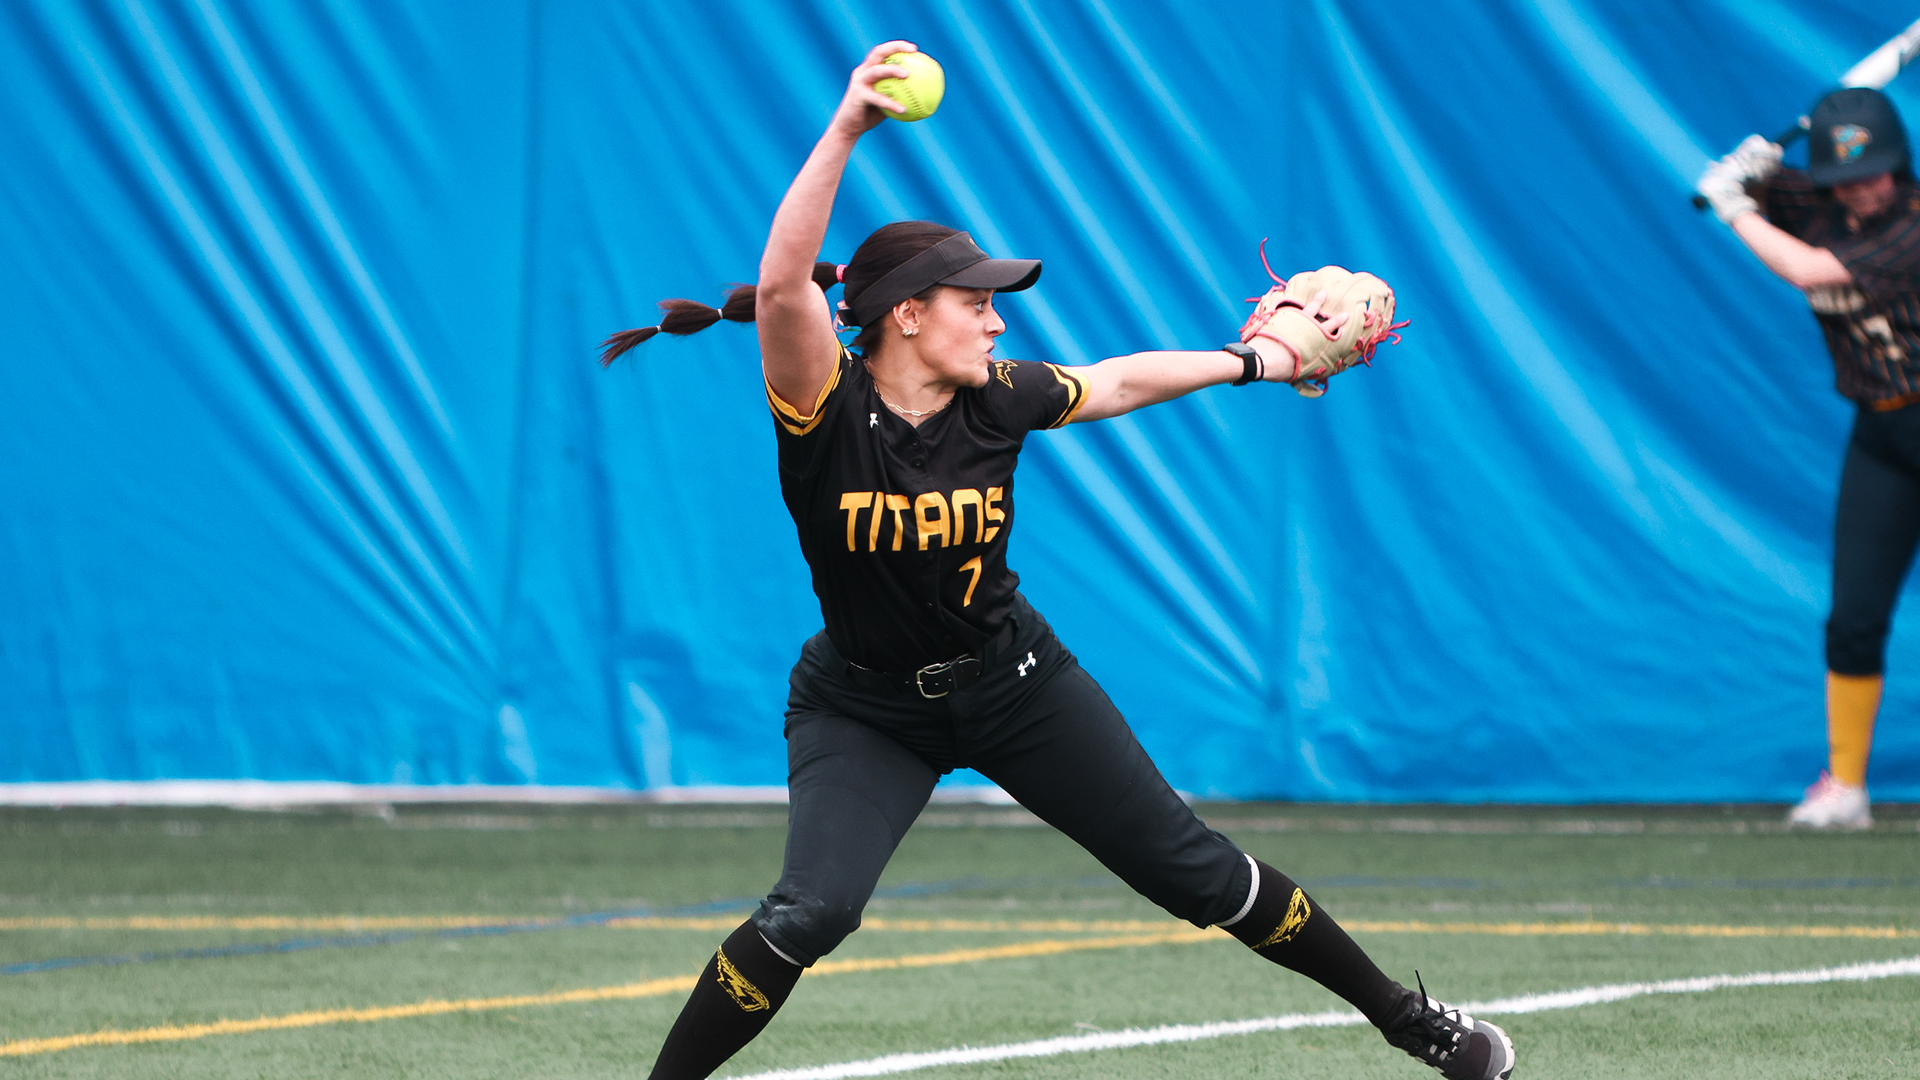 Abby Freismuth threw a complete game shutout for the Titans on Saturday, striking out four while giving up three hits. Photo Credit: Morgan Feltz, UW-Oshkosh Sports Information